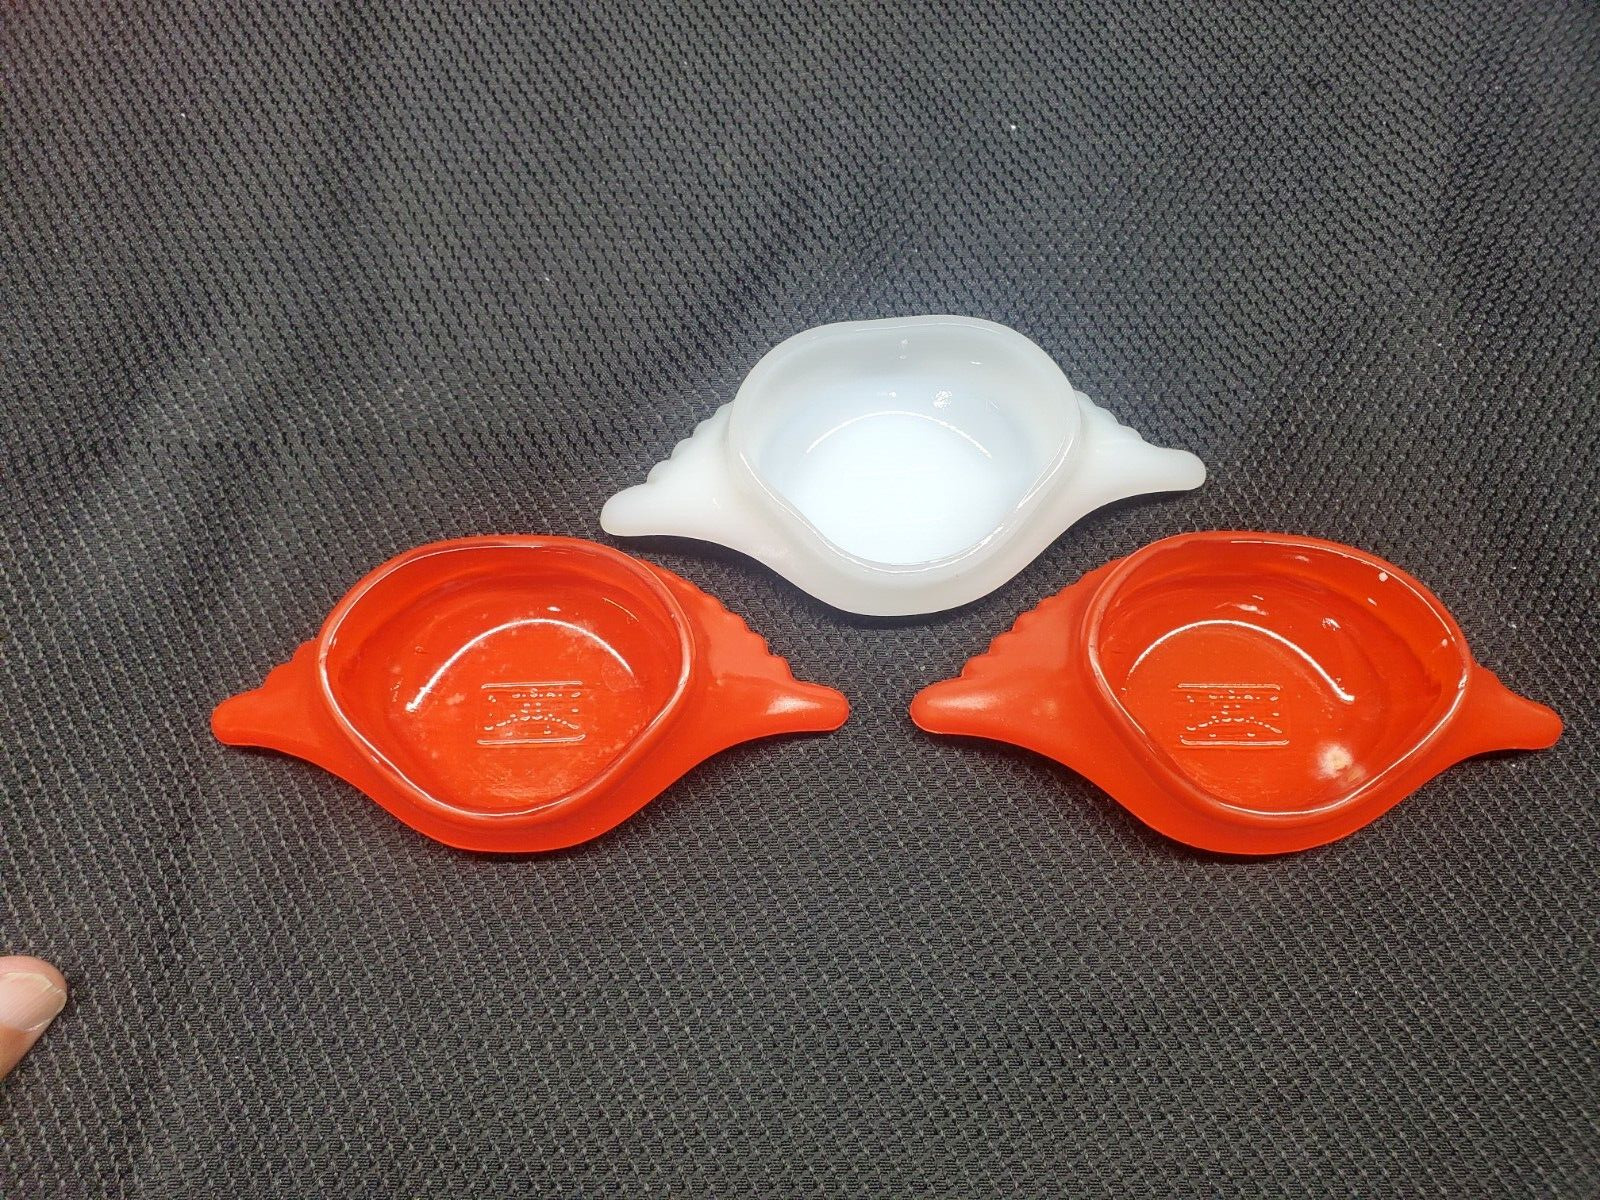 3 Vintage Glasbake Crab Shell Imperial Dishes - 2 Red and 1 White